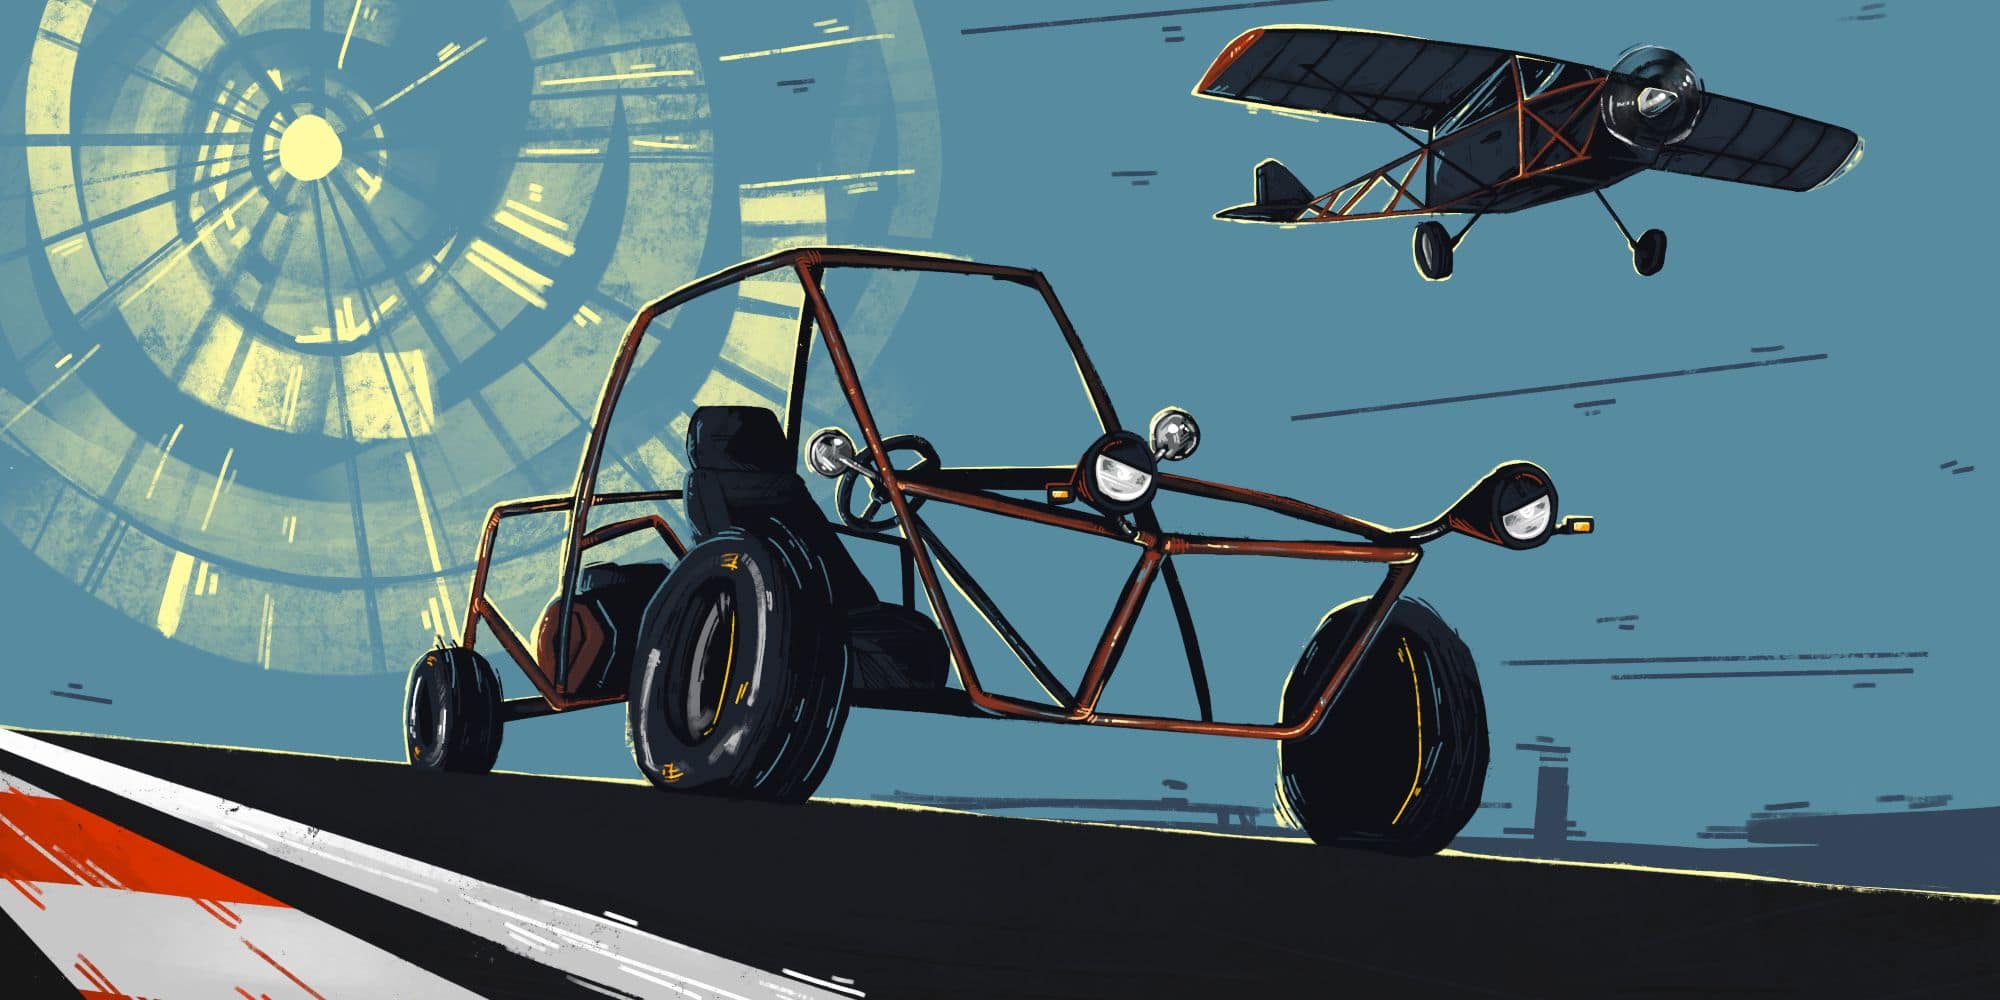 Artwork of a car frame driving beside a flying airplane by student and artist Bella Memeo